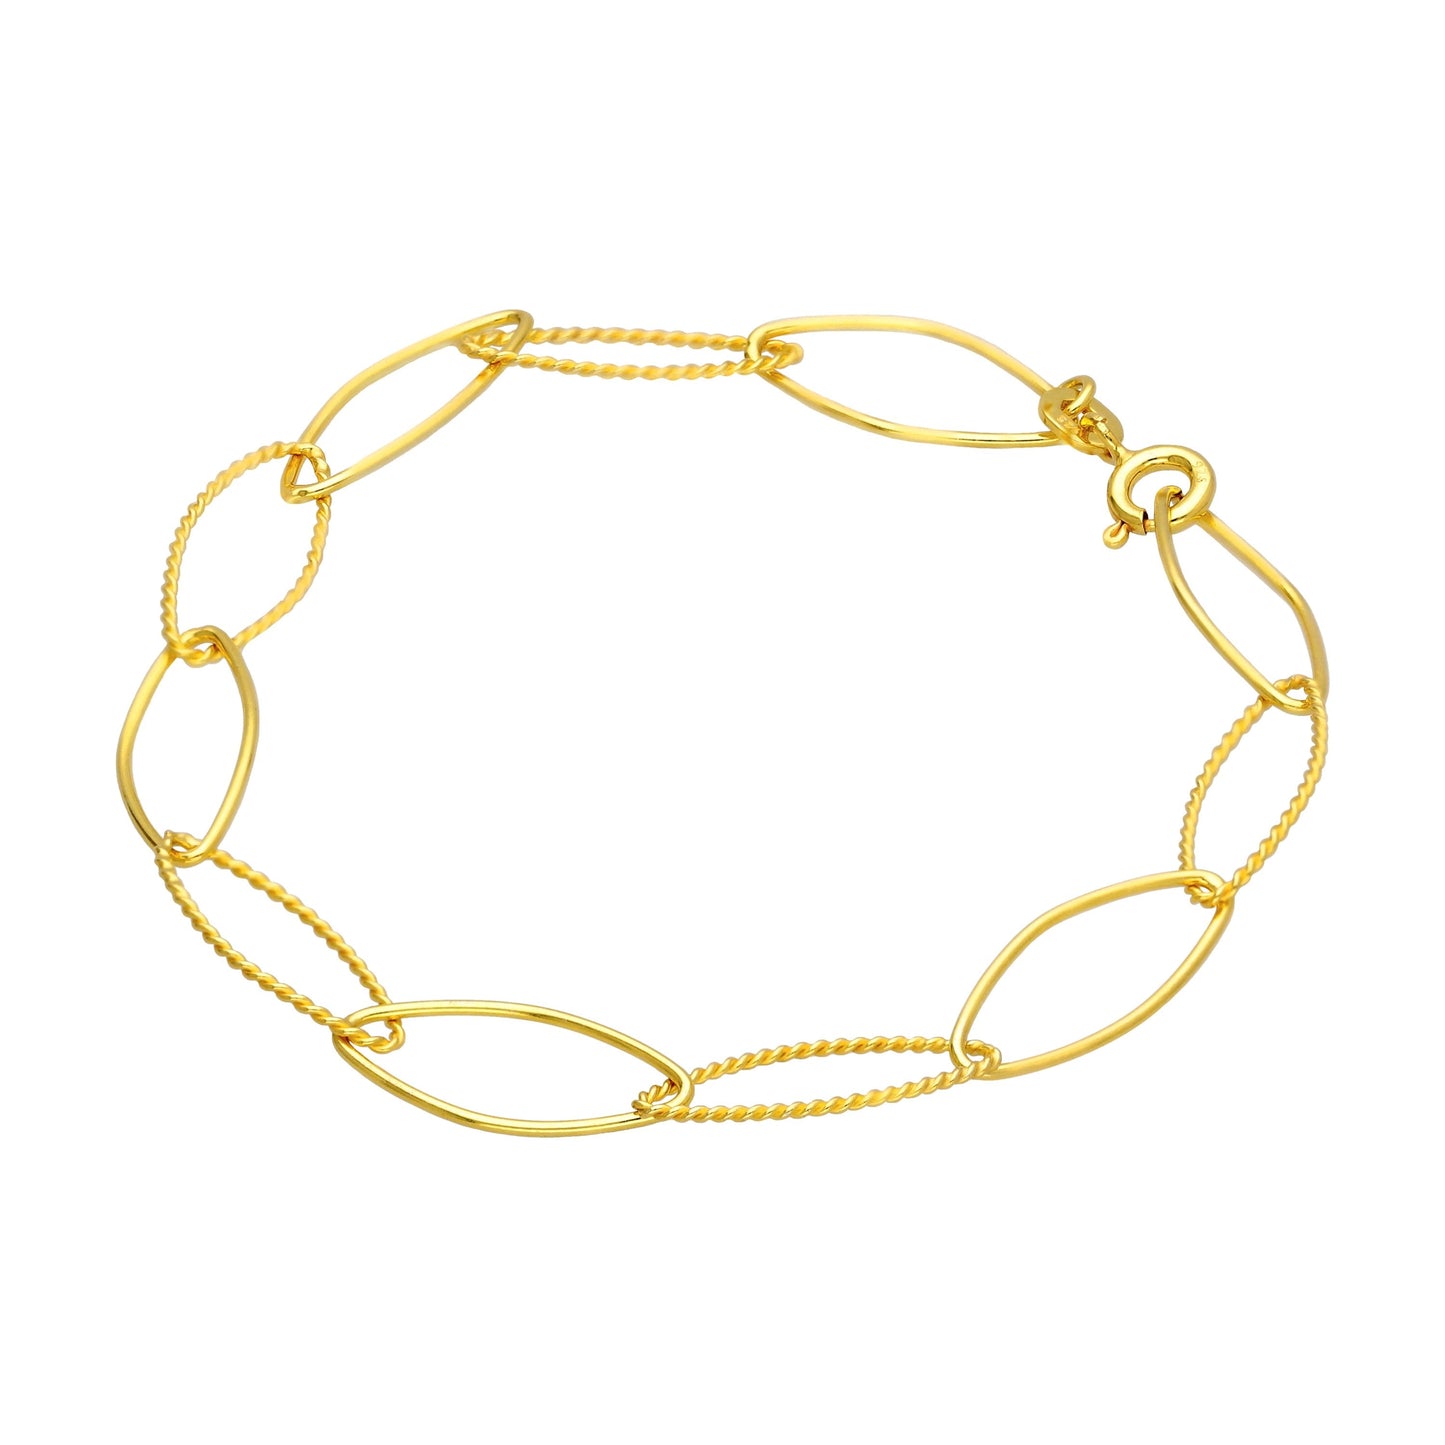 Gold Plated Sterling Silver Twisted Oval Link Chain Bracelet